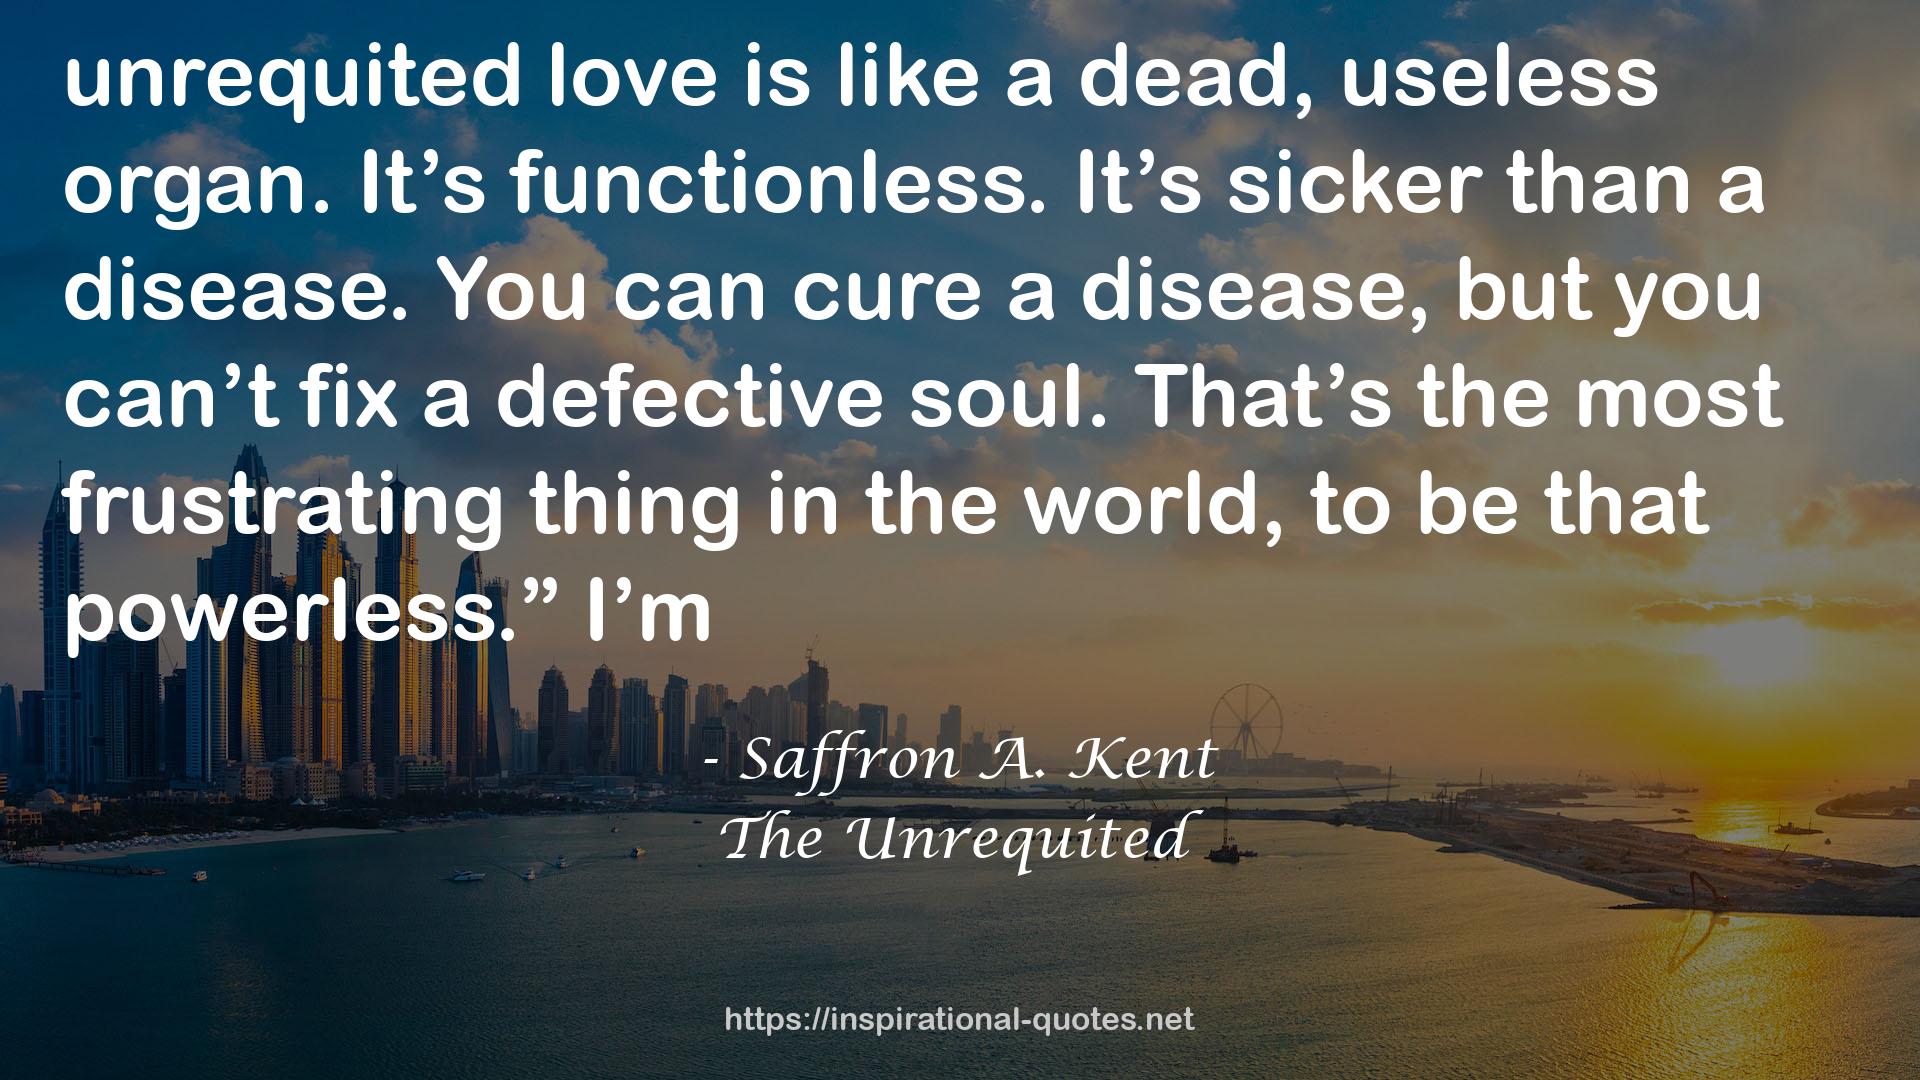 The Unrequited QUOTES